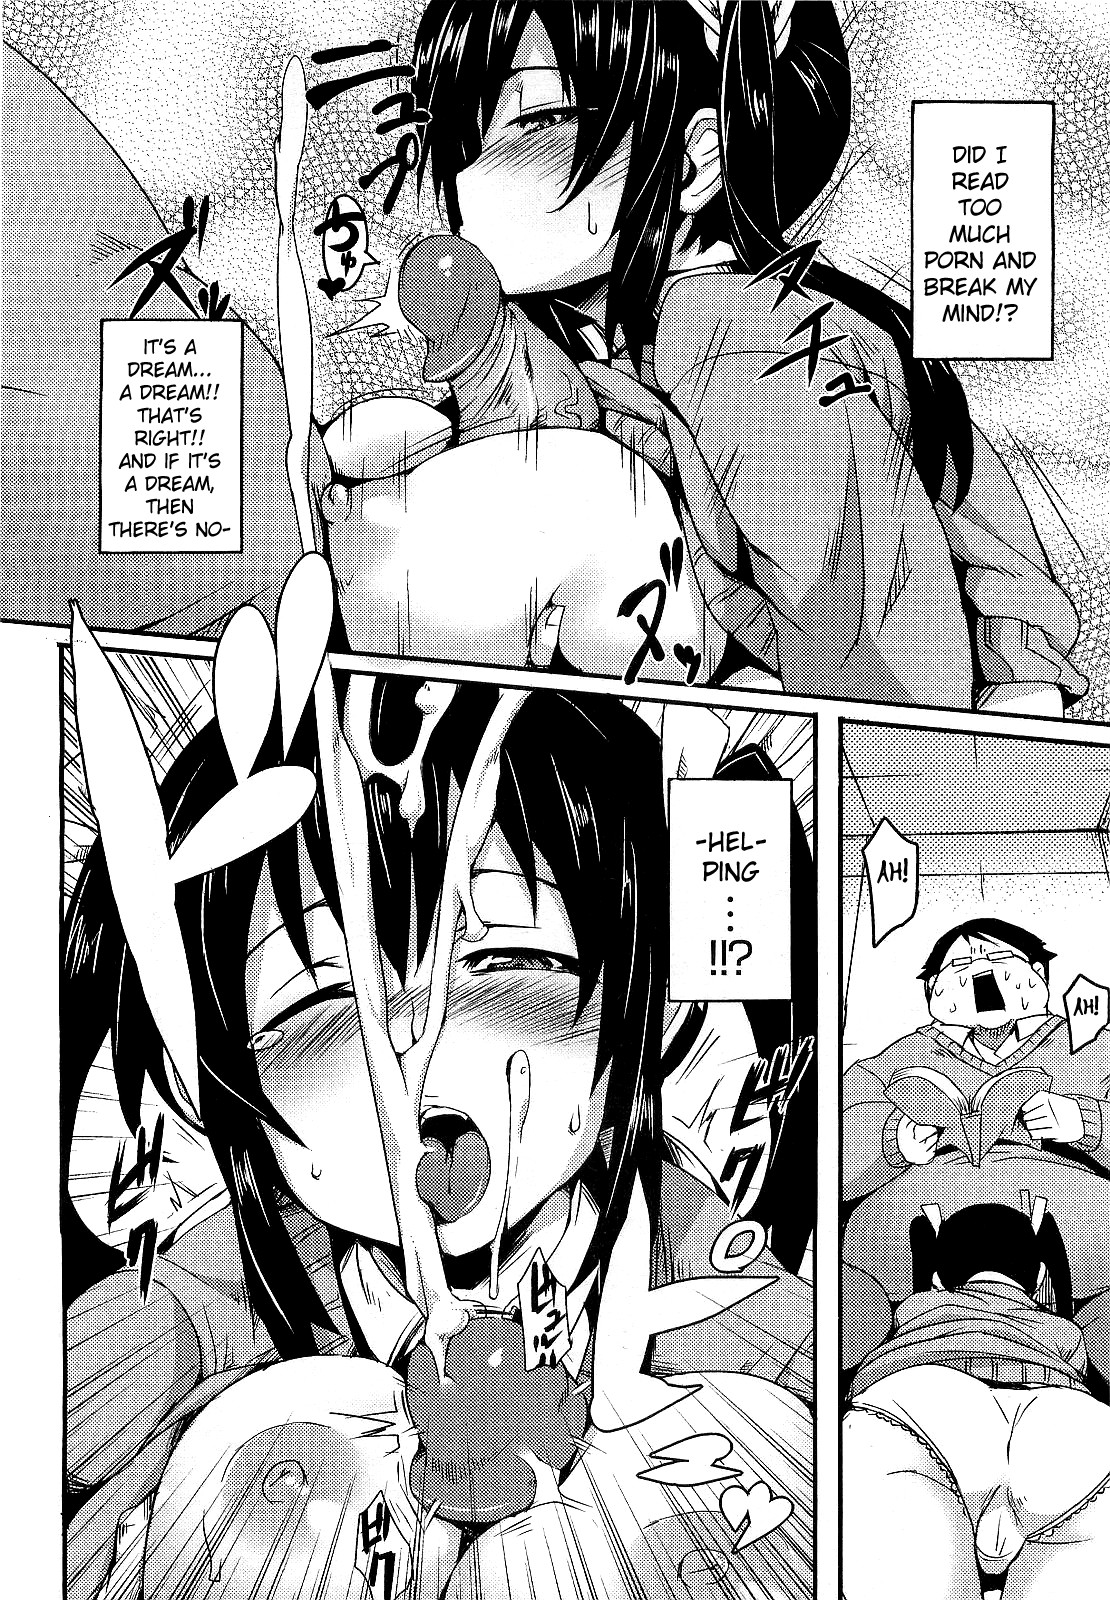 [Hitagiri] Pizza and the Little Bully [Eng] {doujin-moe.us} 